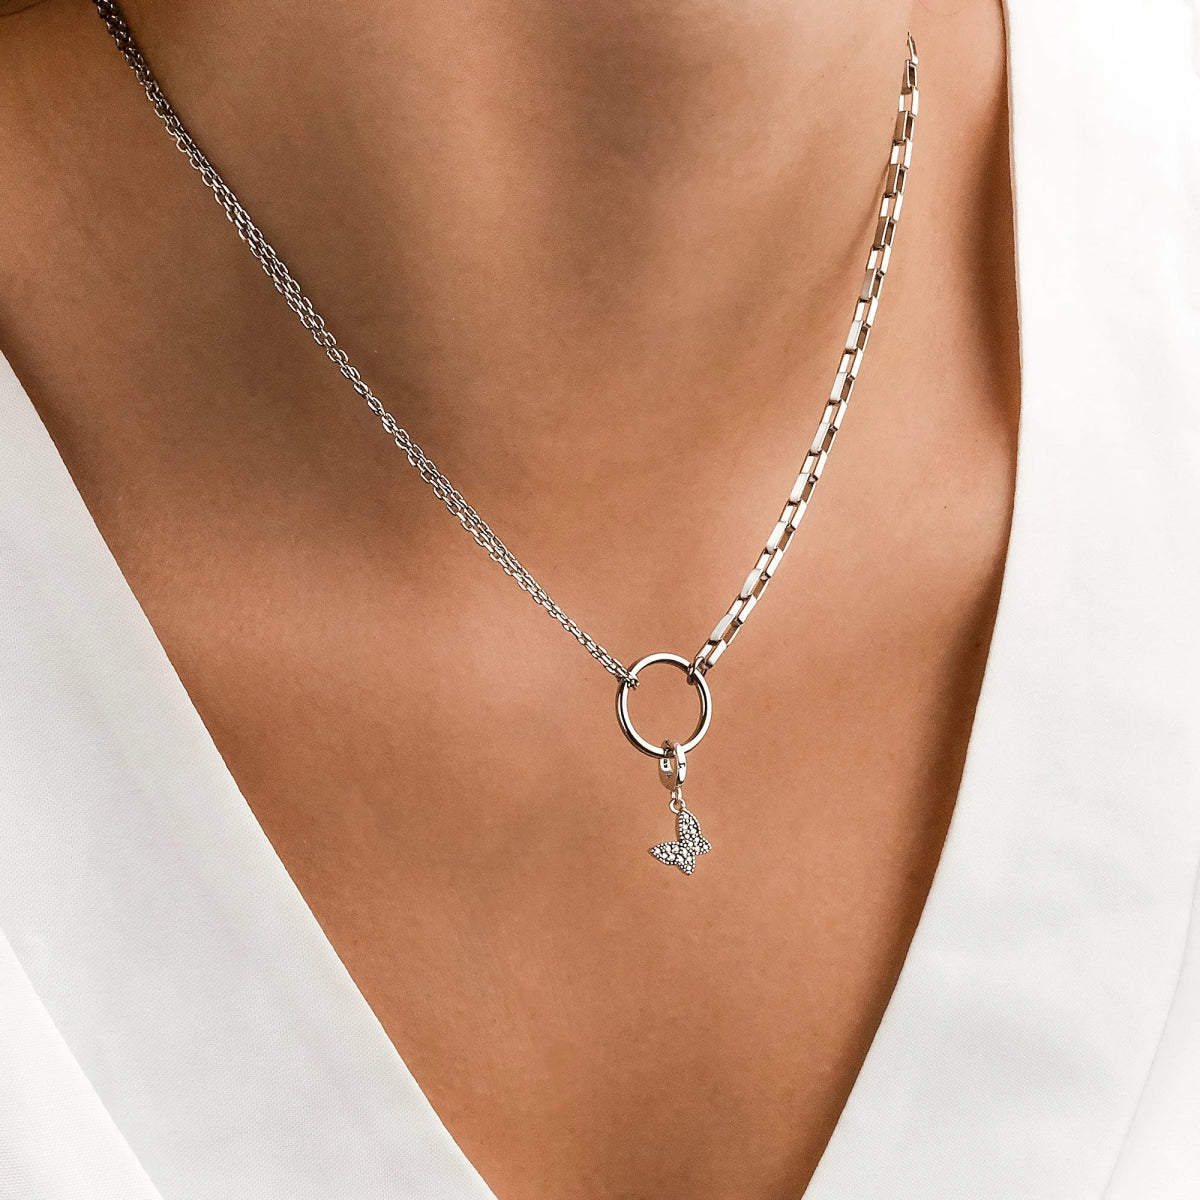 Single Initial Choker Necklace in Sterling Silver by oNecklace